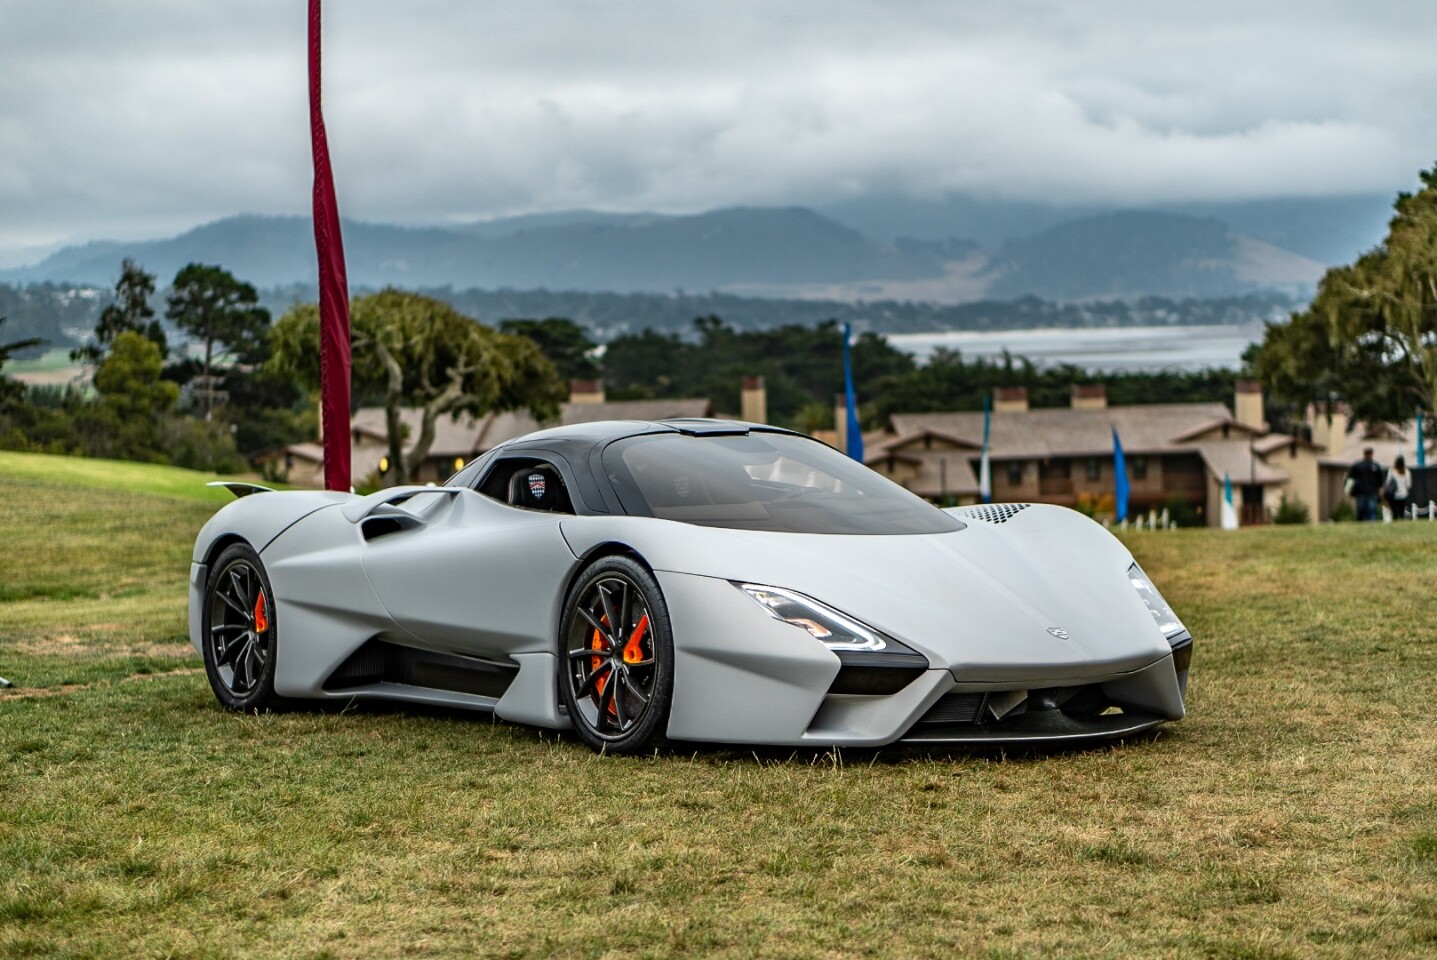 The SSC Tuatara: pretty in white and officially the world's fastest car